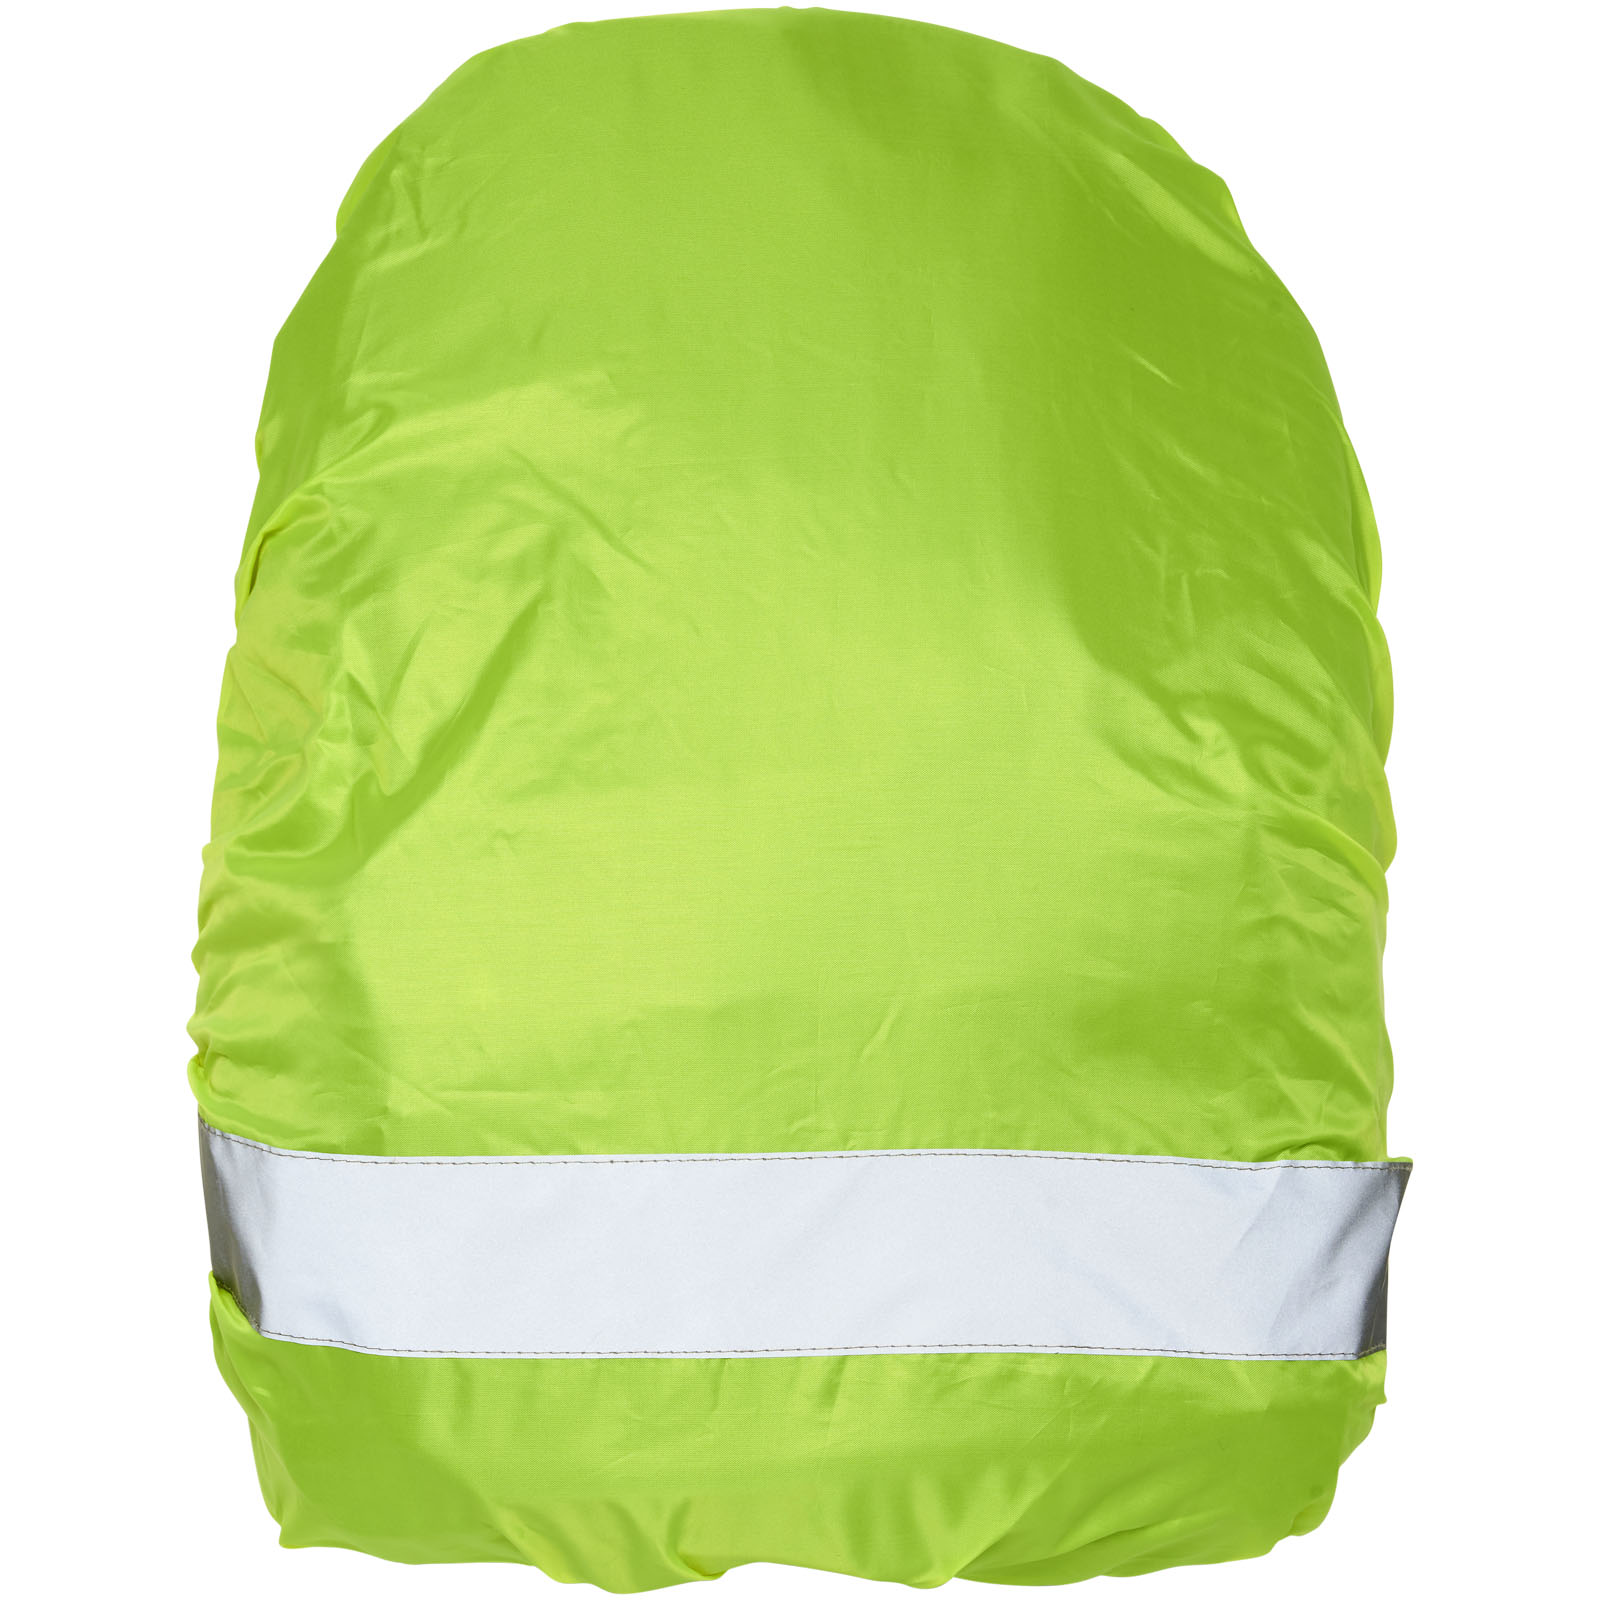 Advertising Reflective Items - RFX™ William reflective and waterproof bag cover - 1